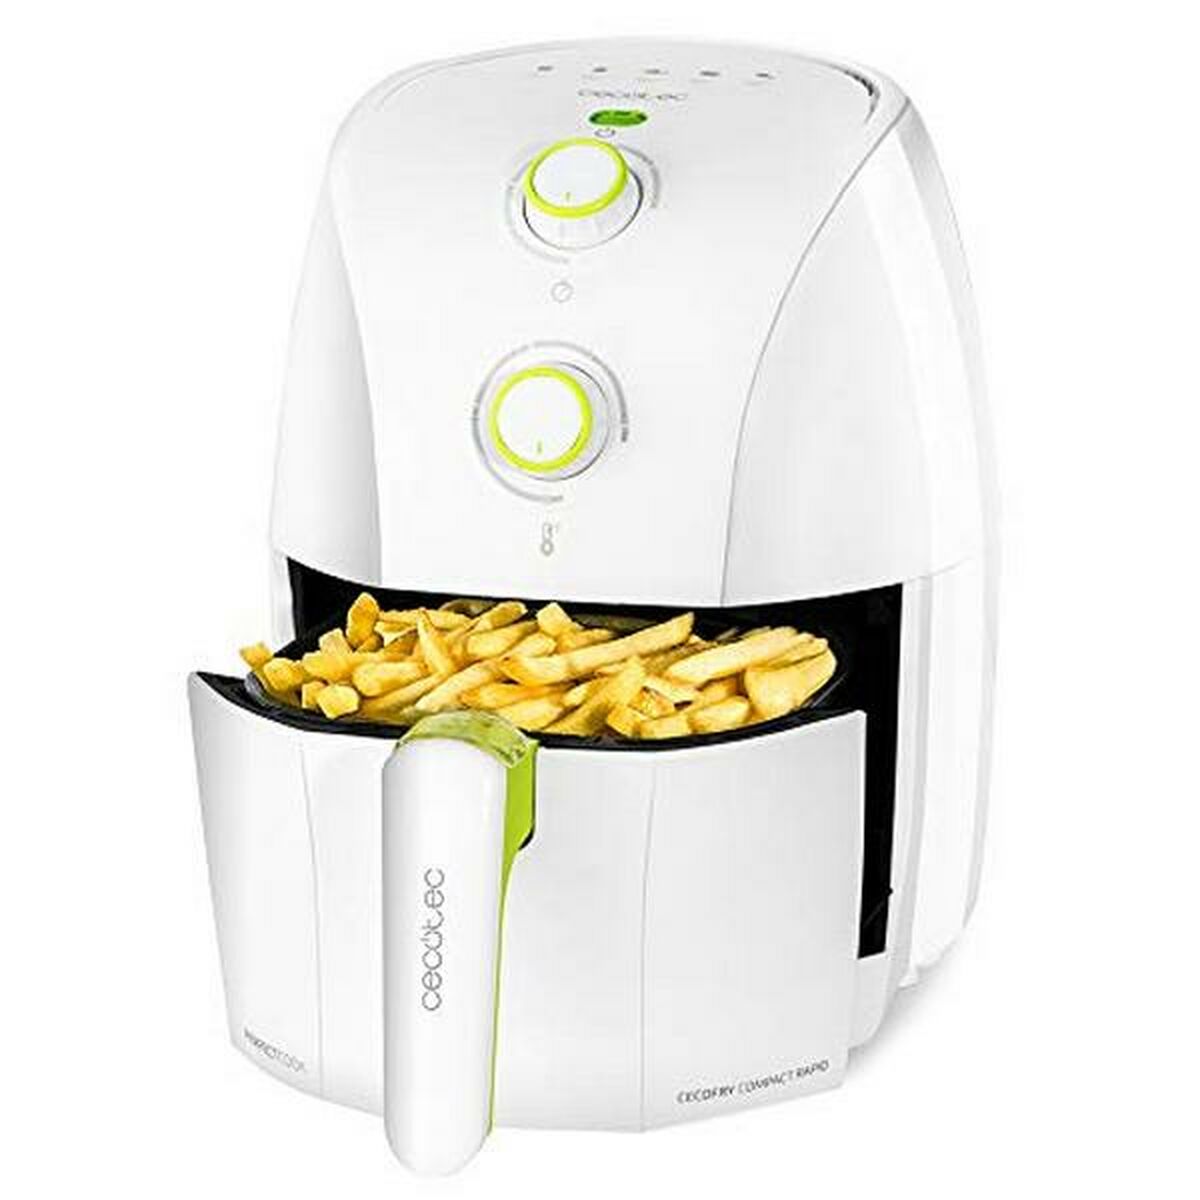 Fritteuse ohne Öl Cecotec Cecofry Compact Rapid (1,5 L) 900 W - CA International 